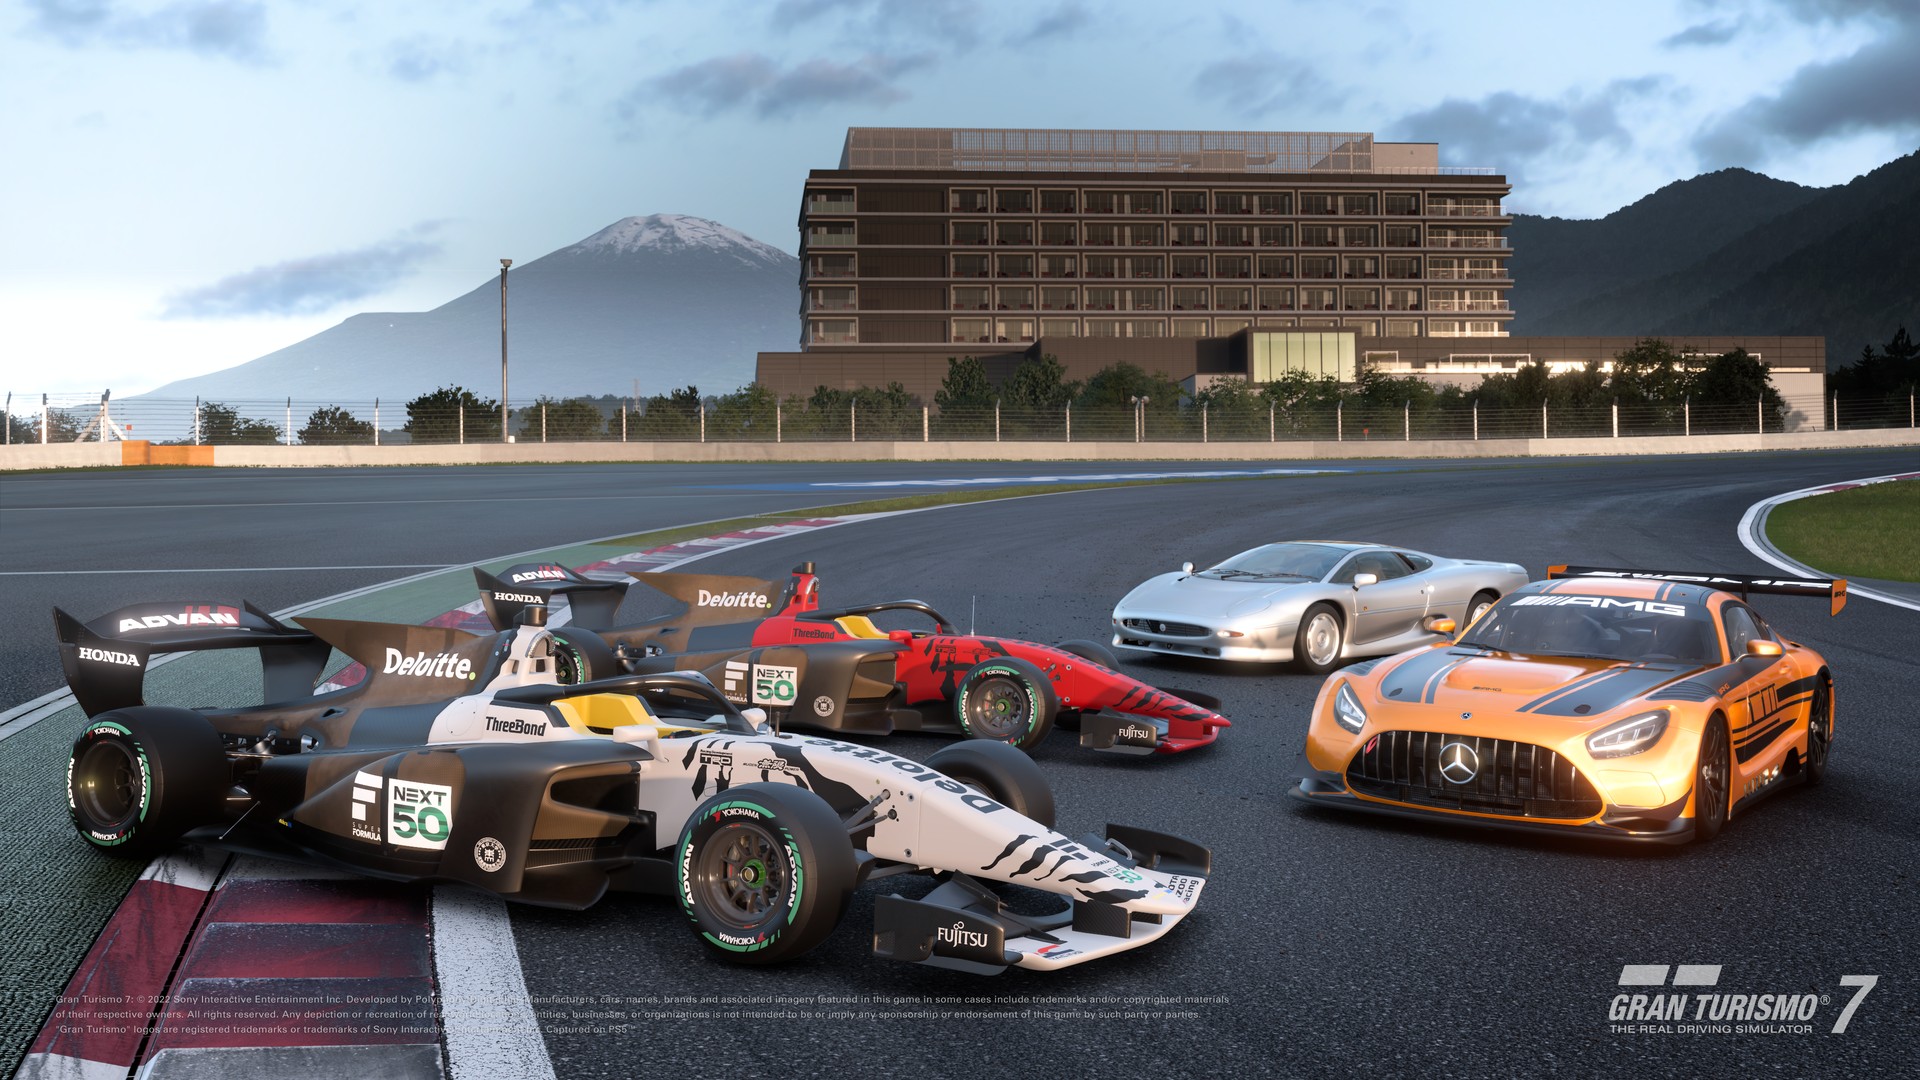 The Gran Turismo 7 April Update Four New Cars Including the 2023 Super